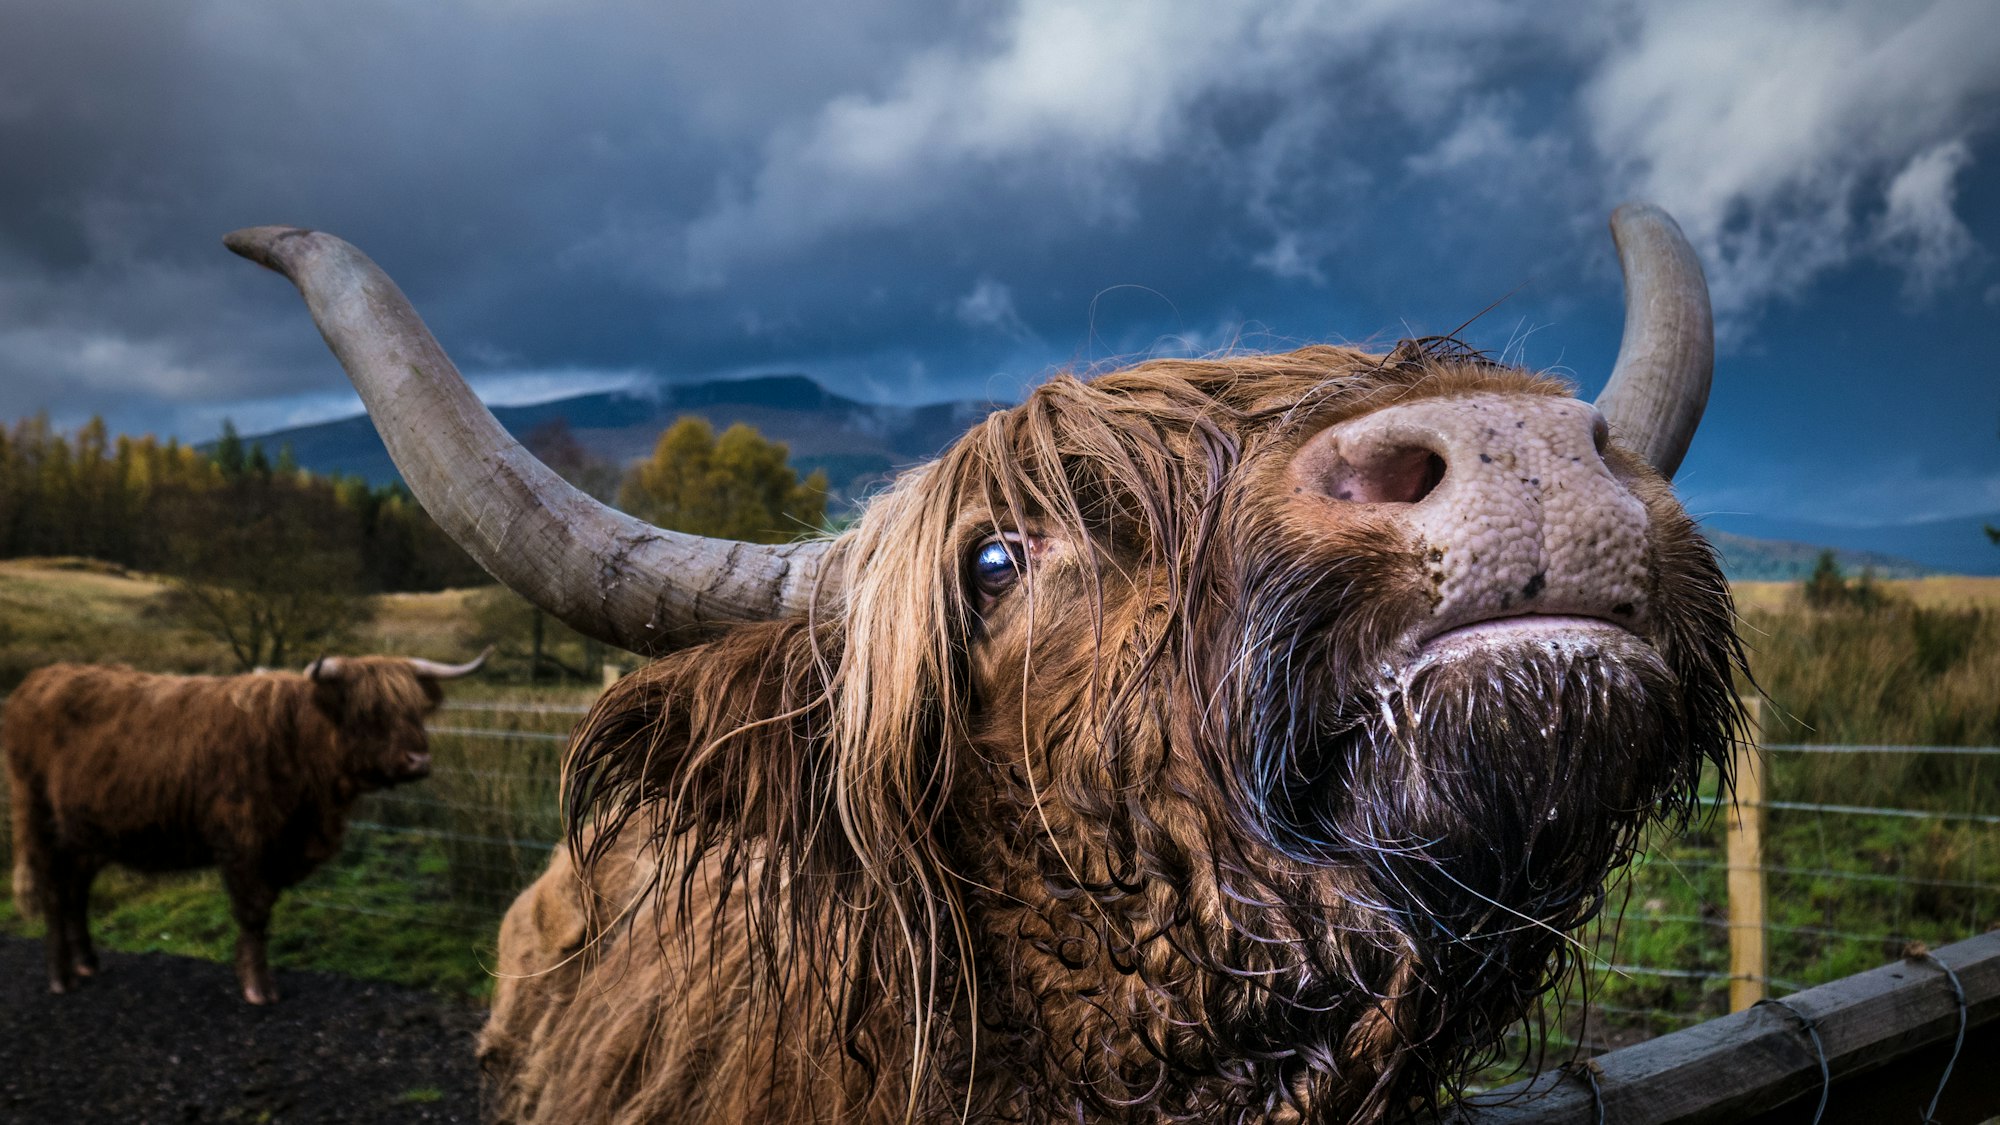 A highland cow next to a fence